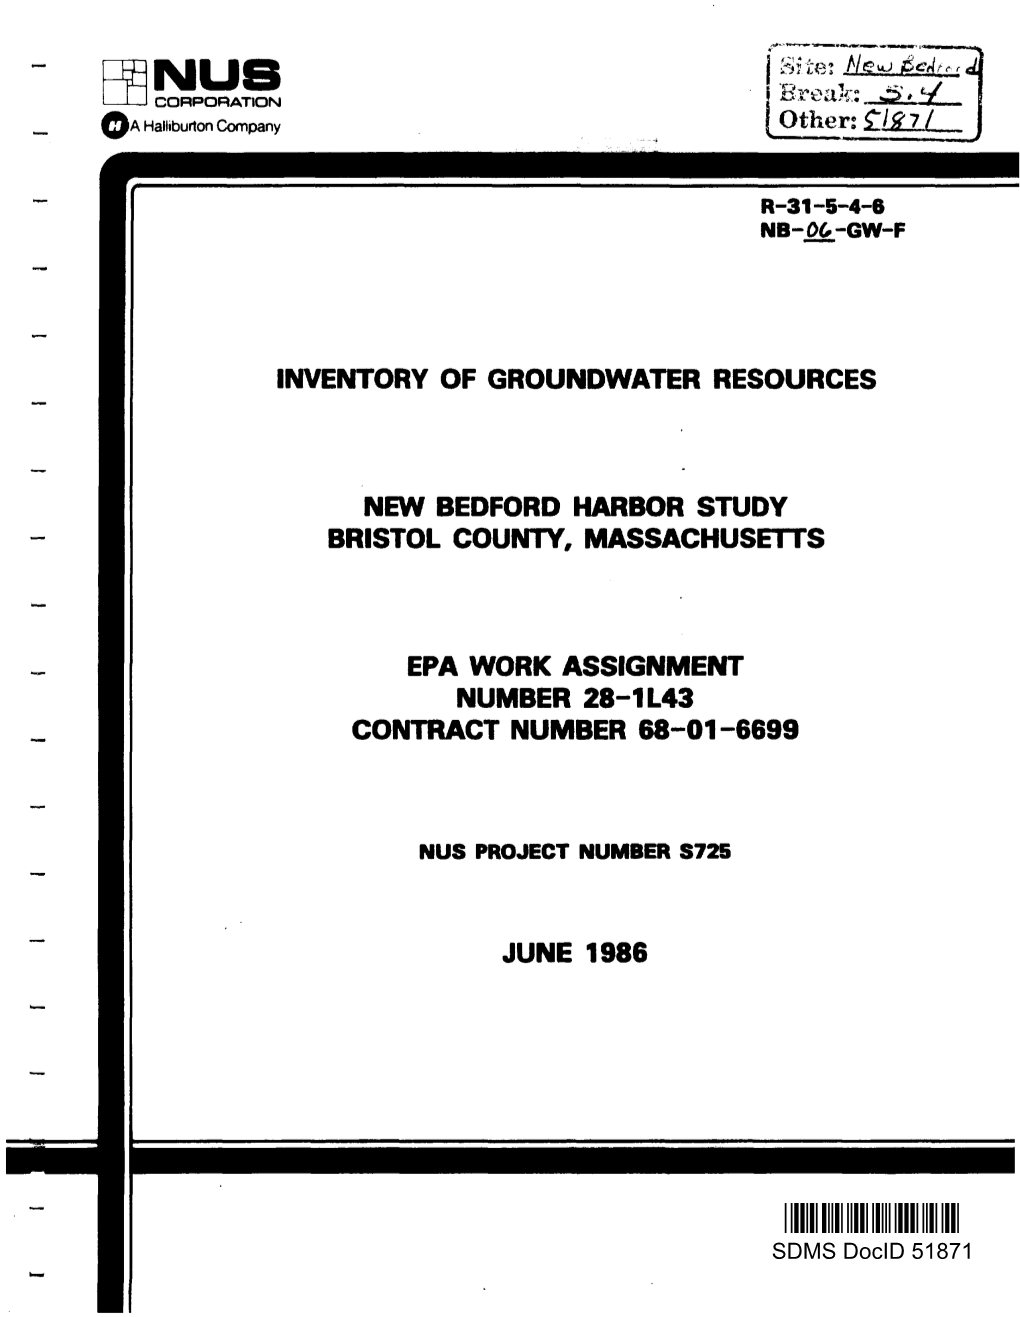 Inventory of Groundwater Resources